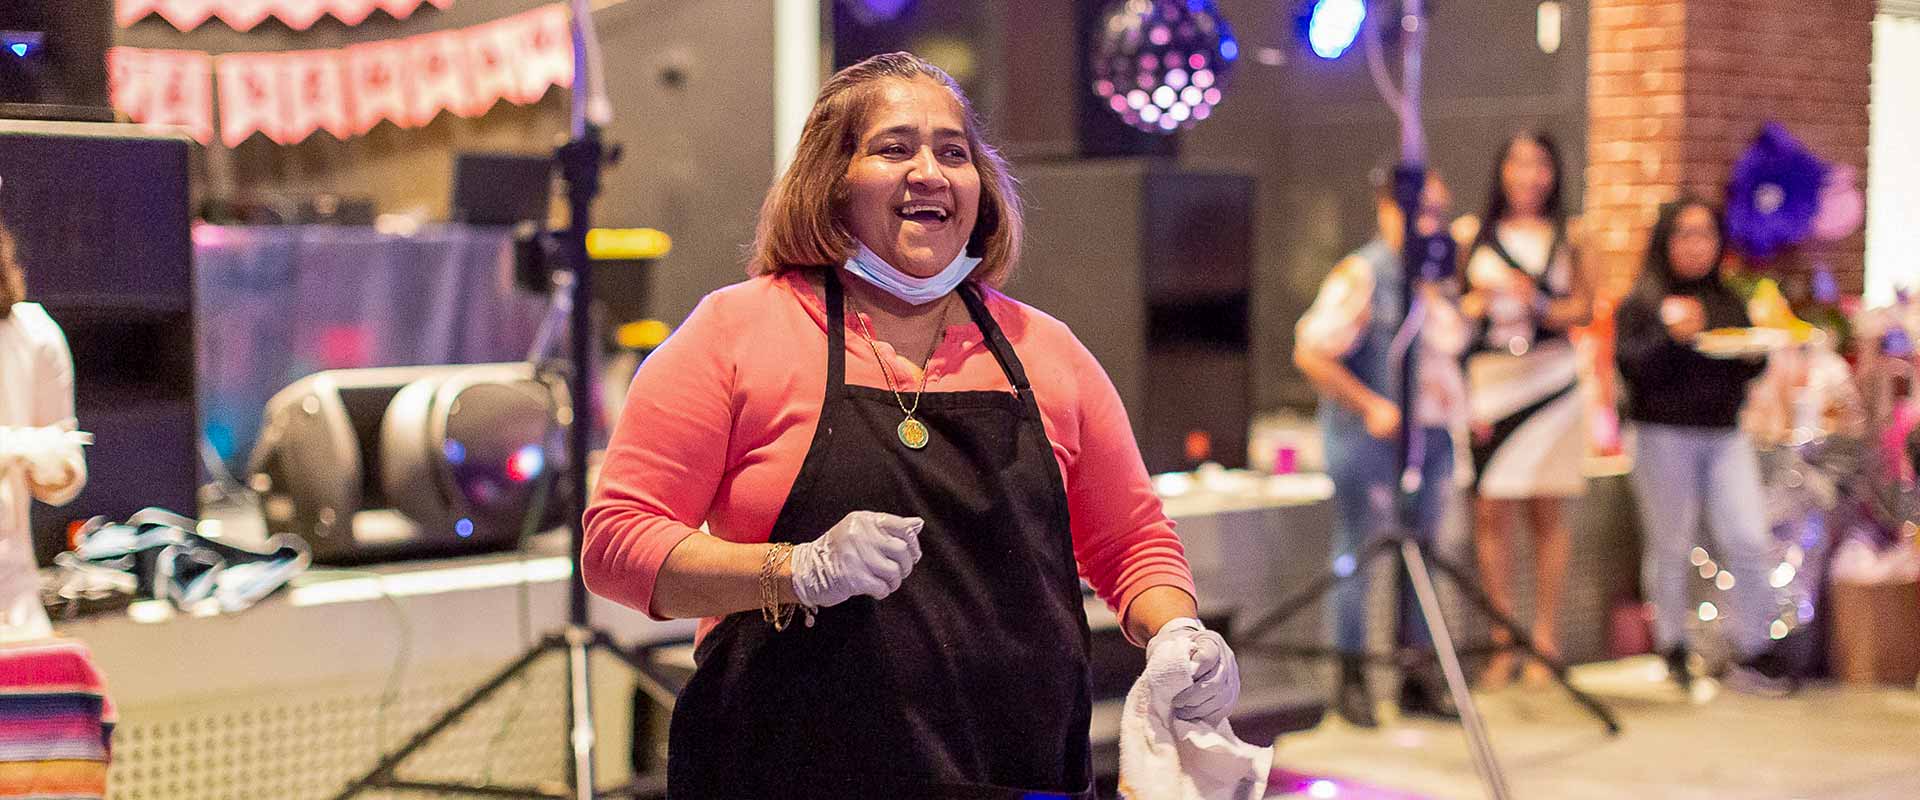 [Sponsorships] A person wearing food service gloves laughs on the floor of a community party